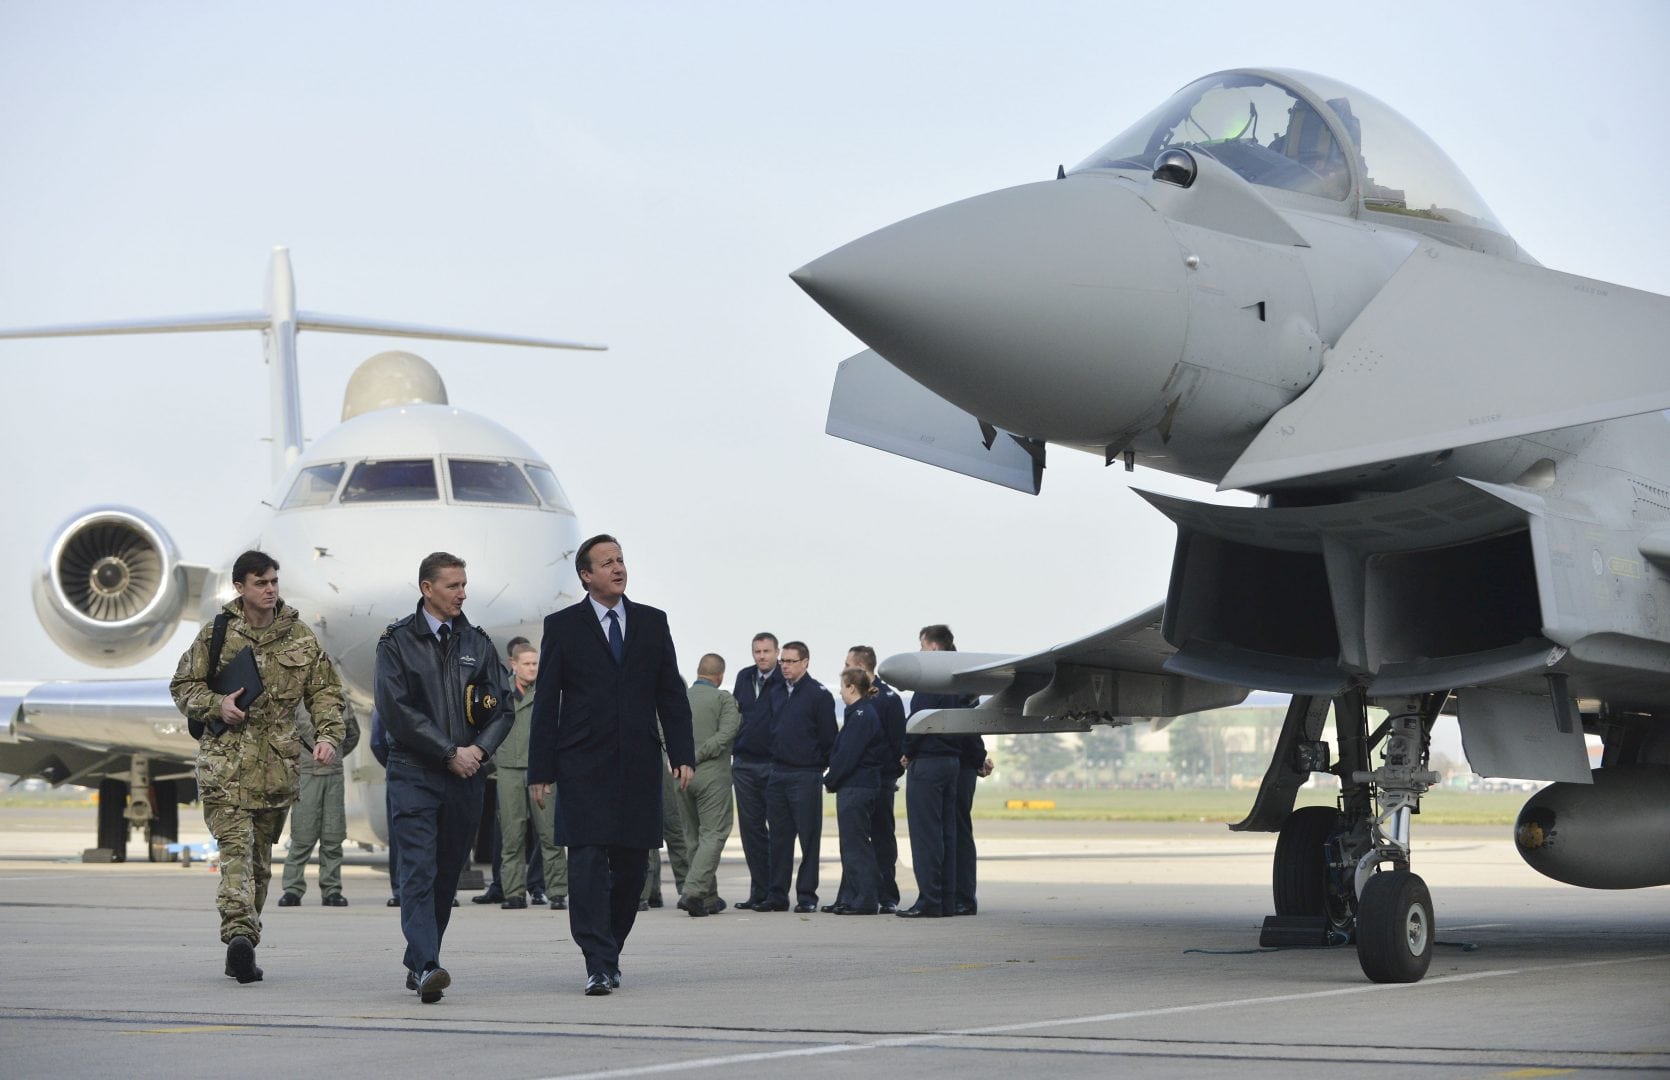 David Cameron looks at Typhoon during visit to RAF Northolt - The Mancunion